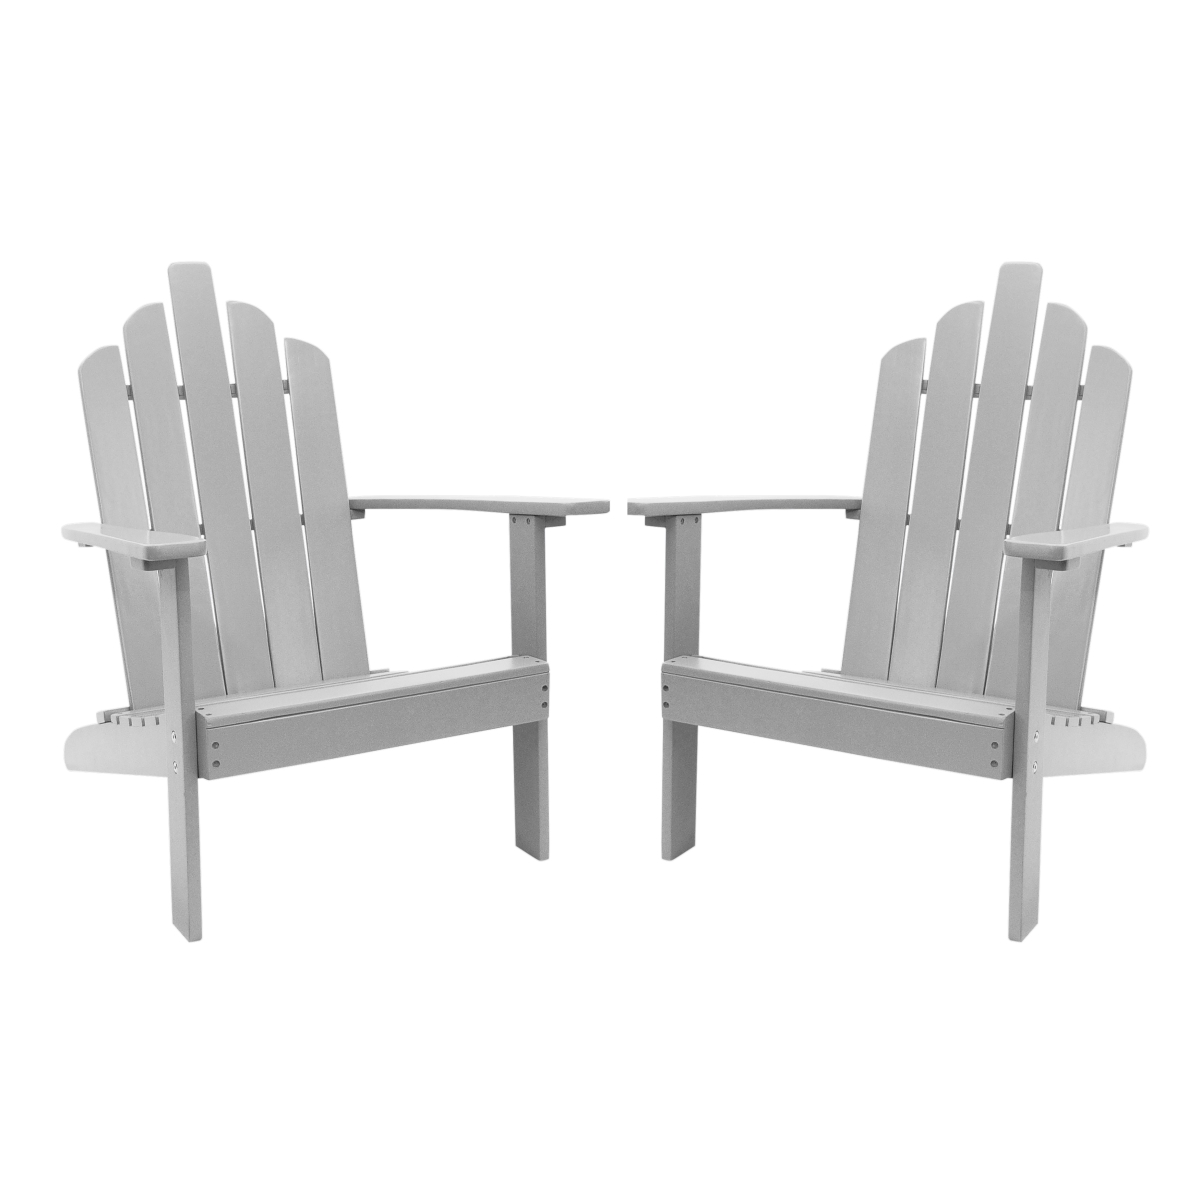 2003111-2 Outdoor Patio Wood Adirondack Chair, Gray - Pack Of 2